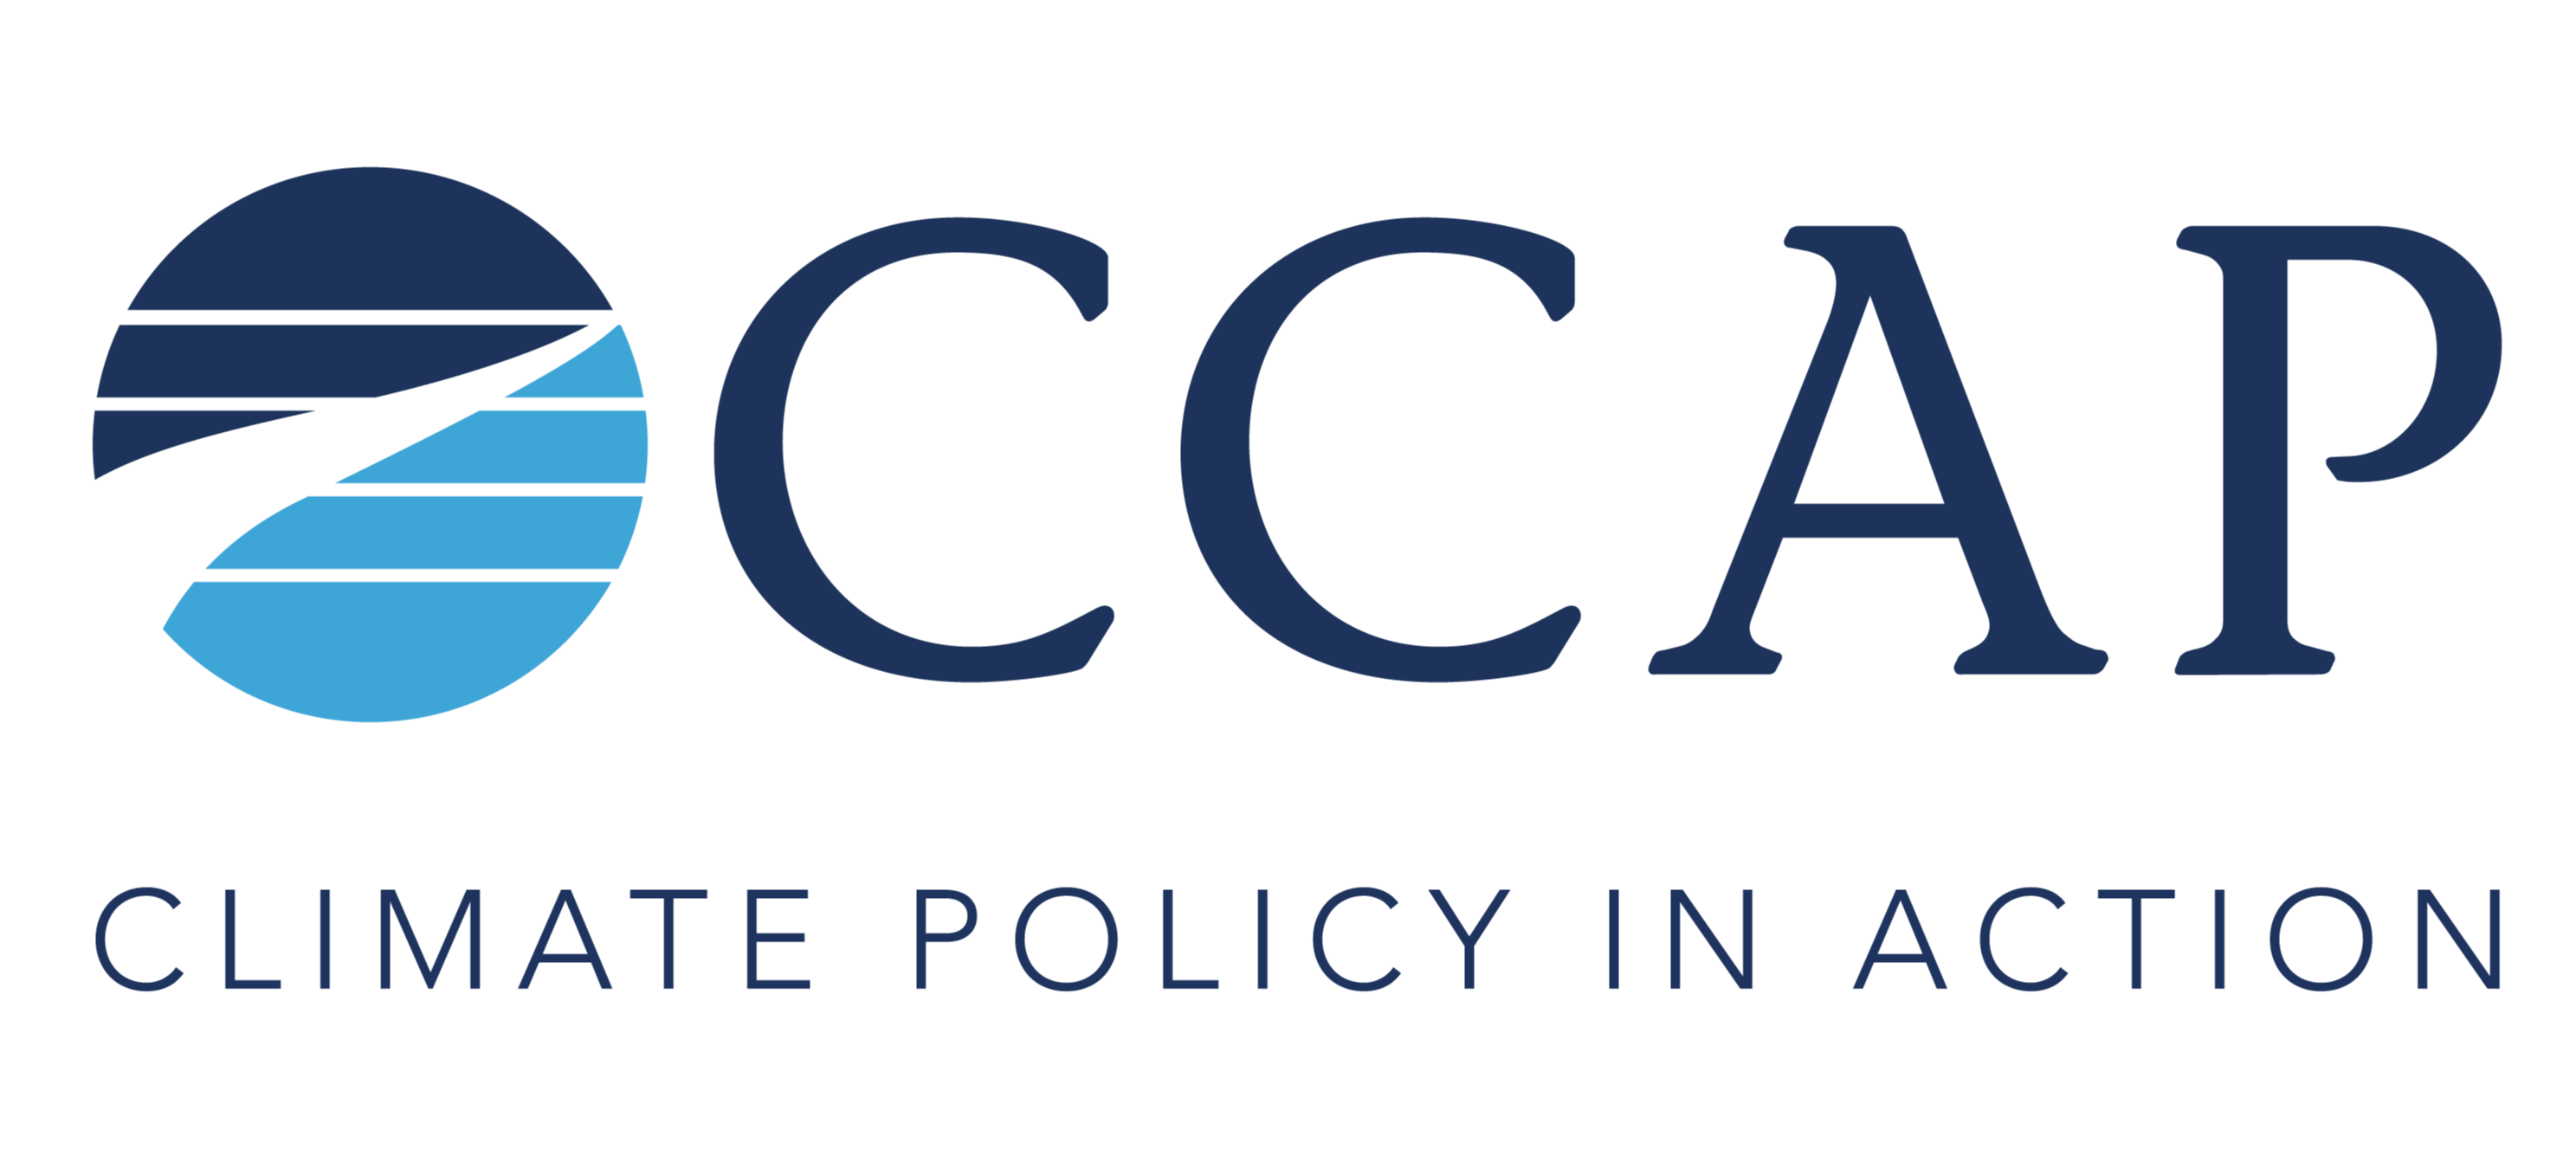 Center for Clean Air Policy logo